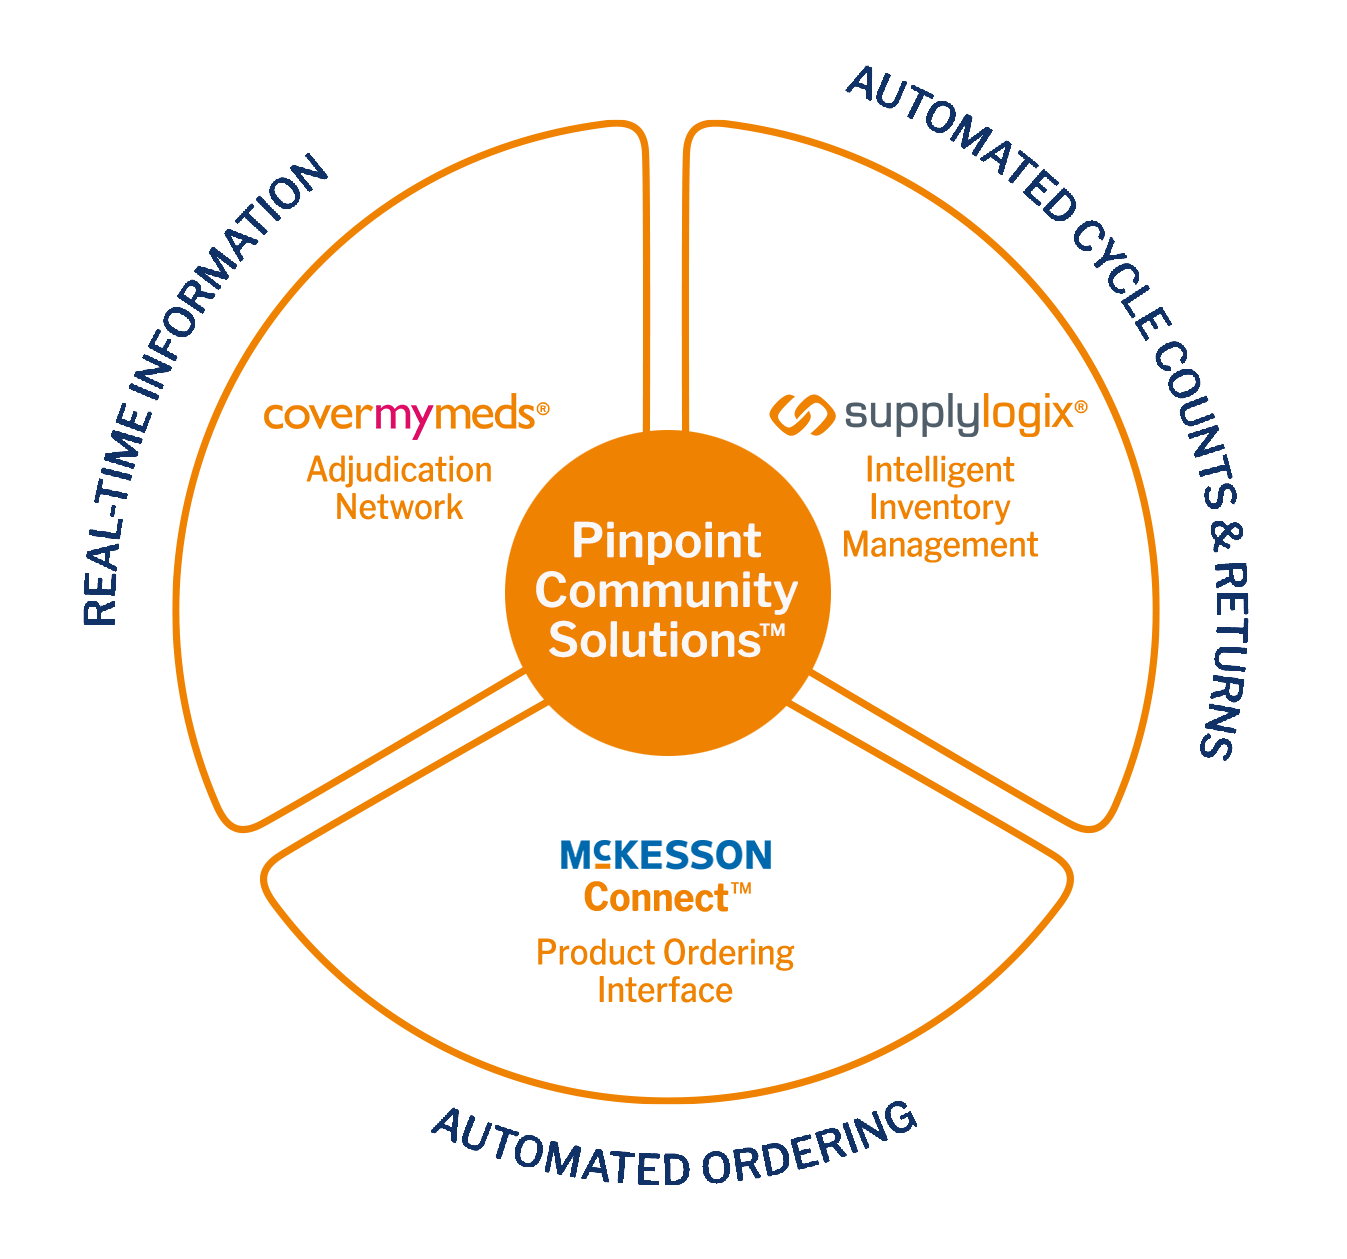 Pinpoint Community Solutions